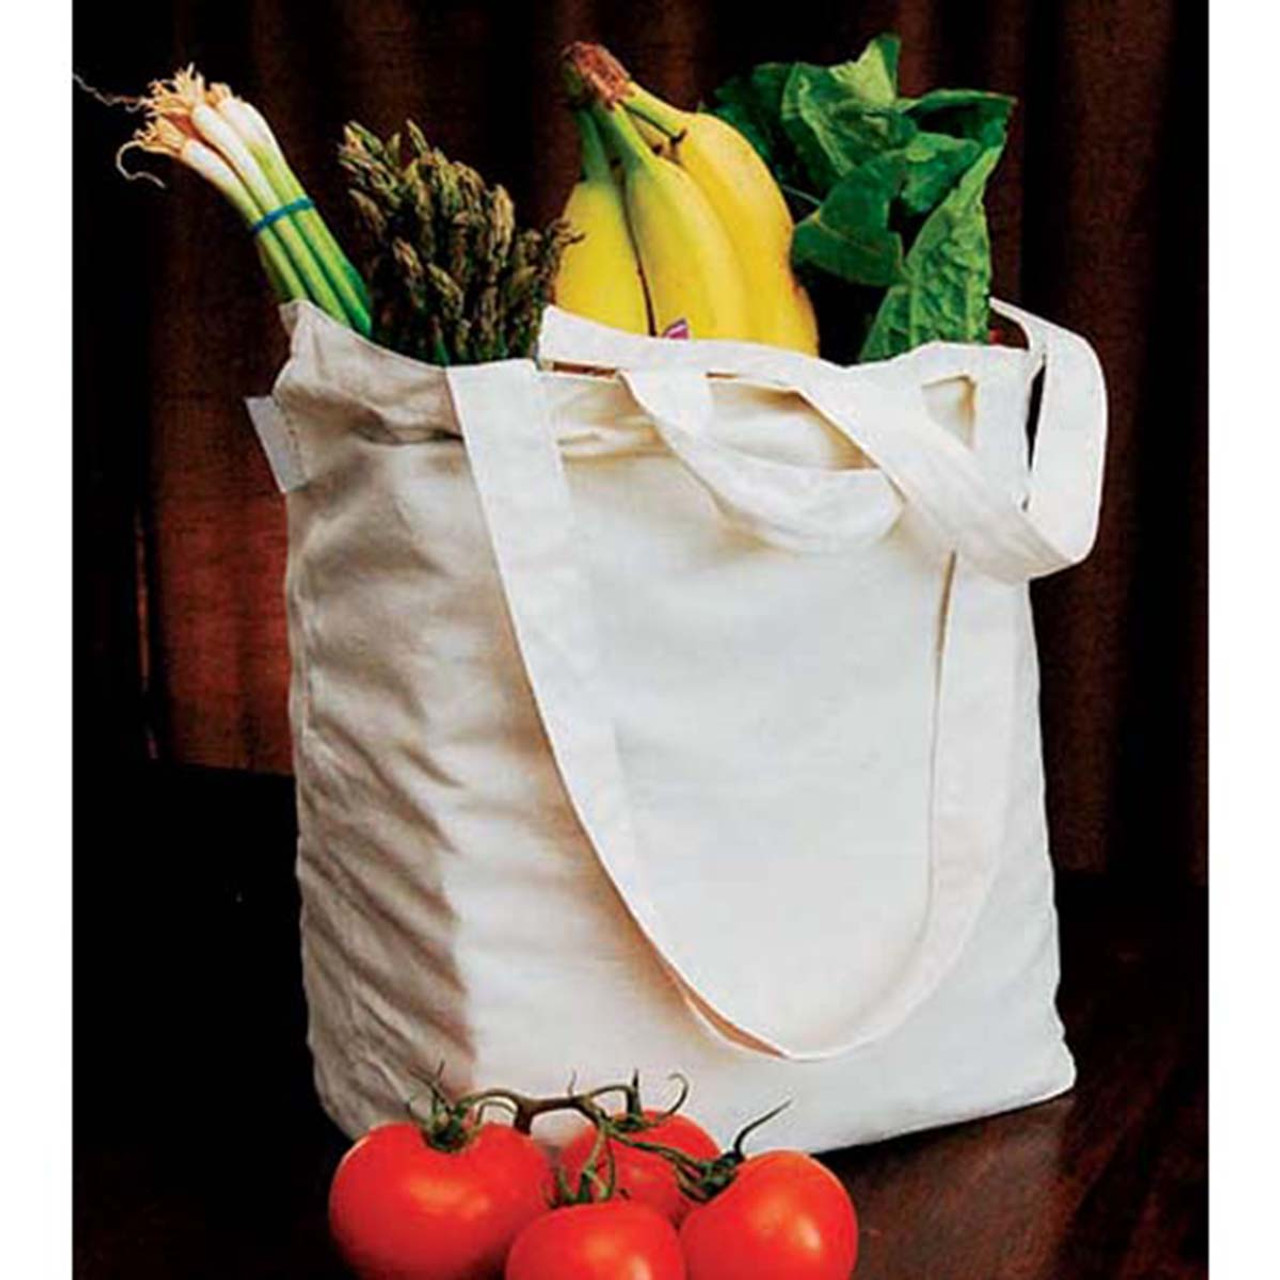 Best Storage Solution for Reusable Shopping Bags